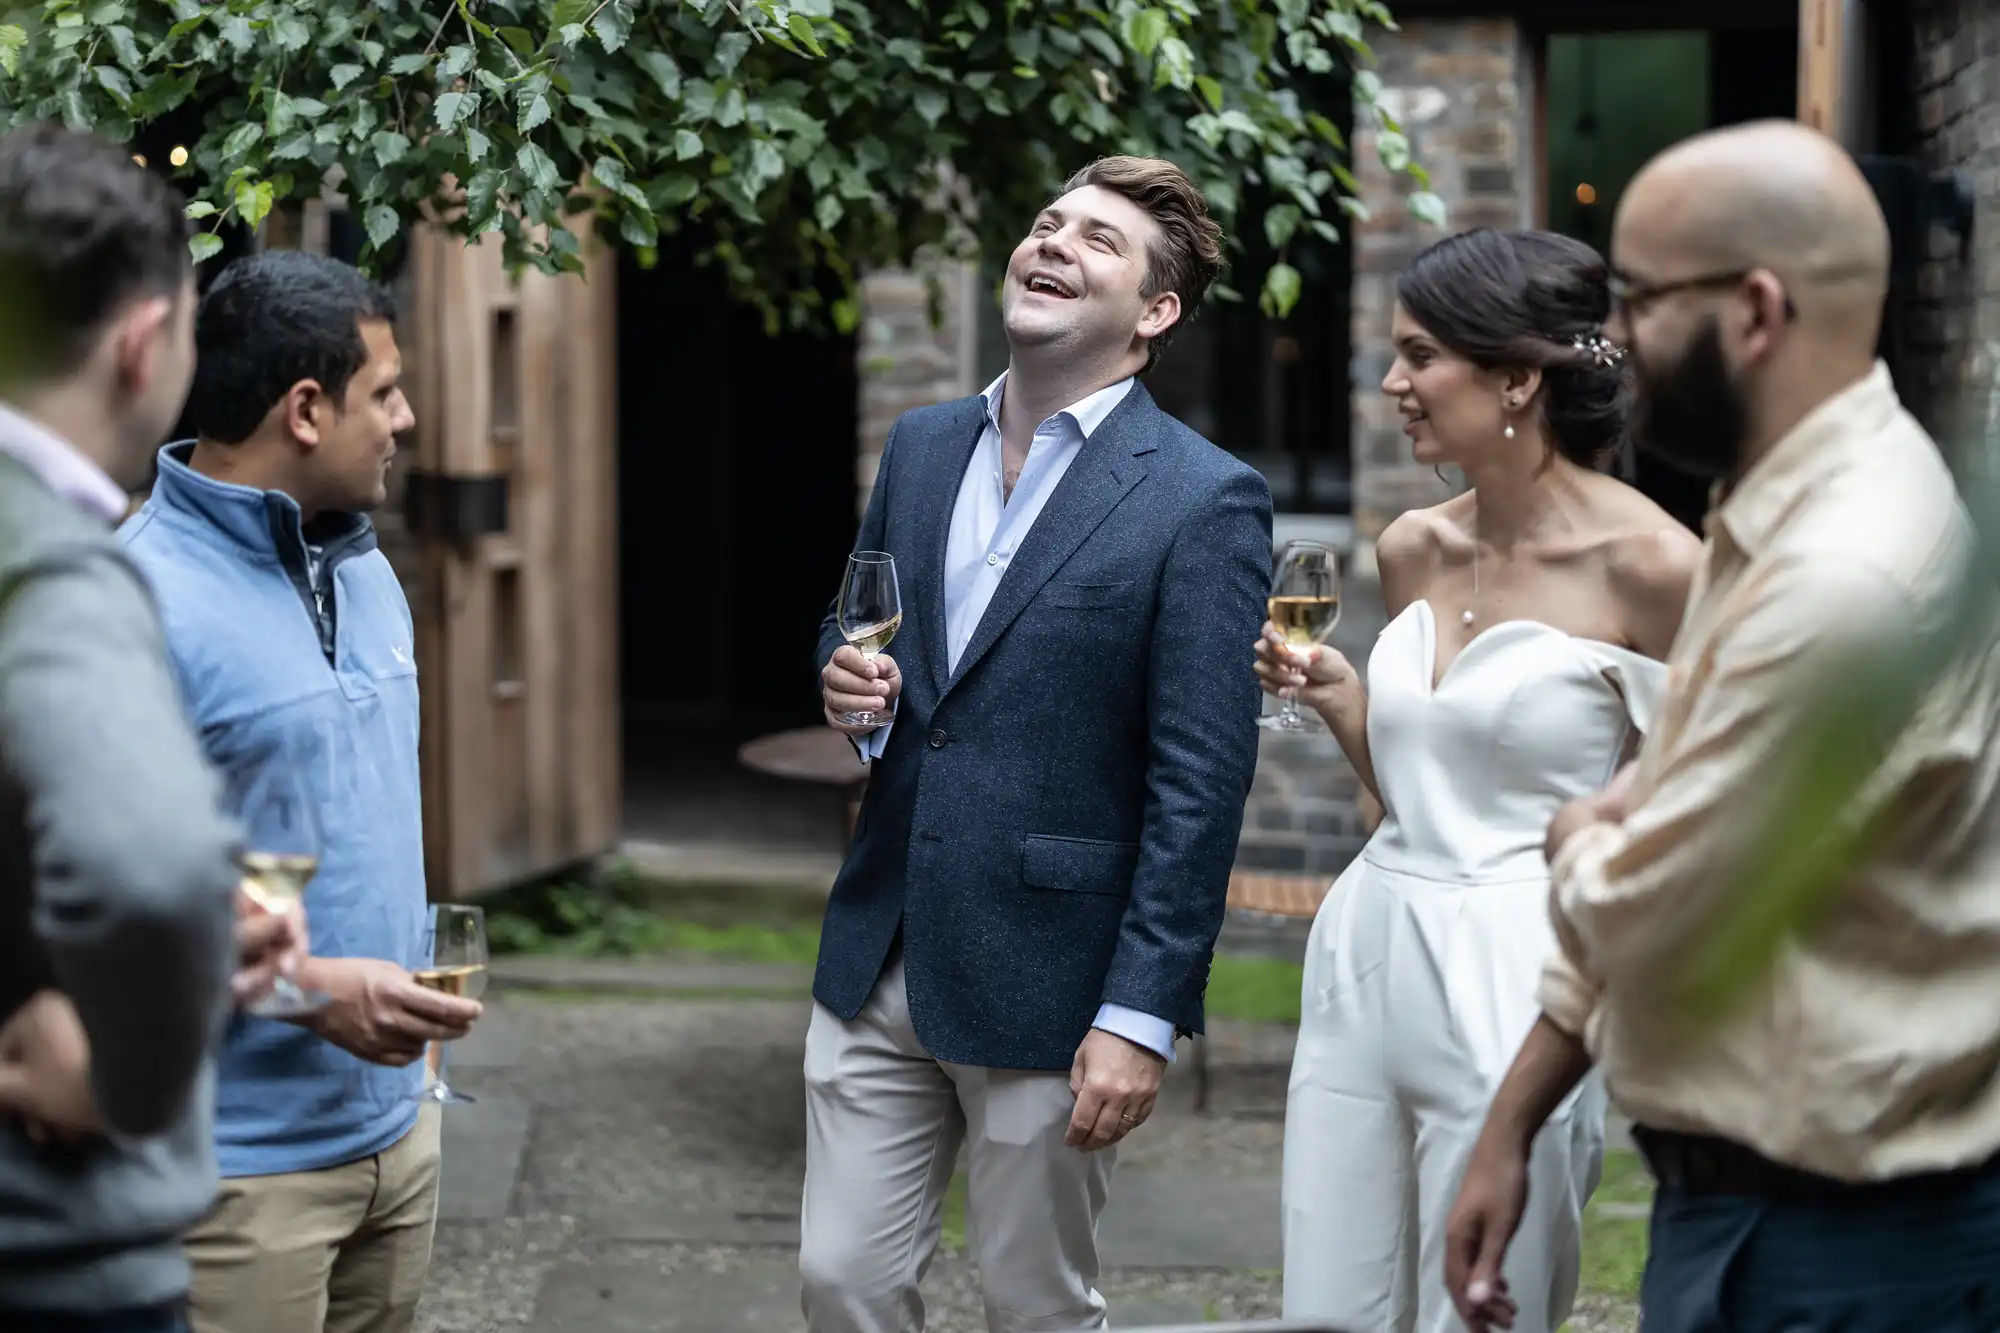 A joyful man in a blue blazer laughs while holding a wine glass, surrounded by a group of people in a courtyard, including a couple in wedding attire.